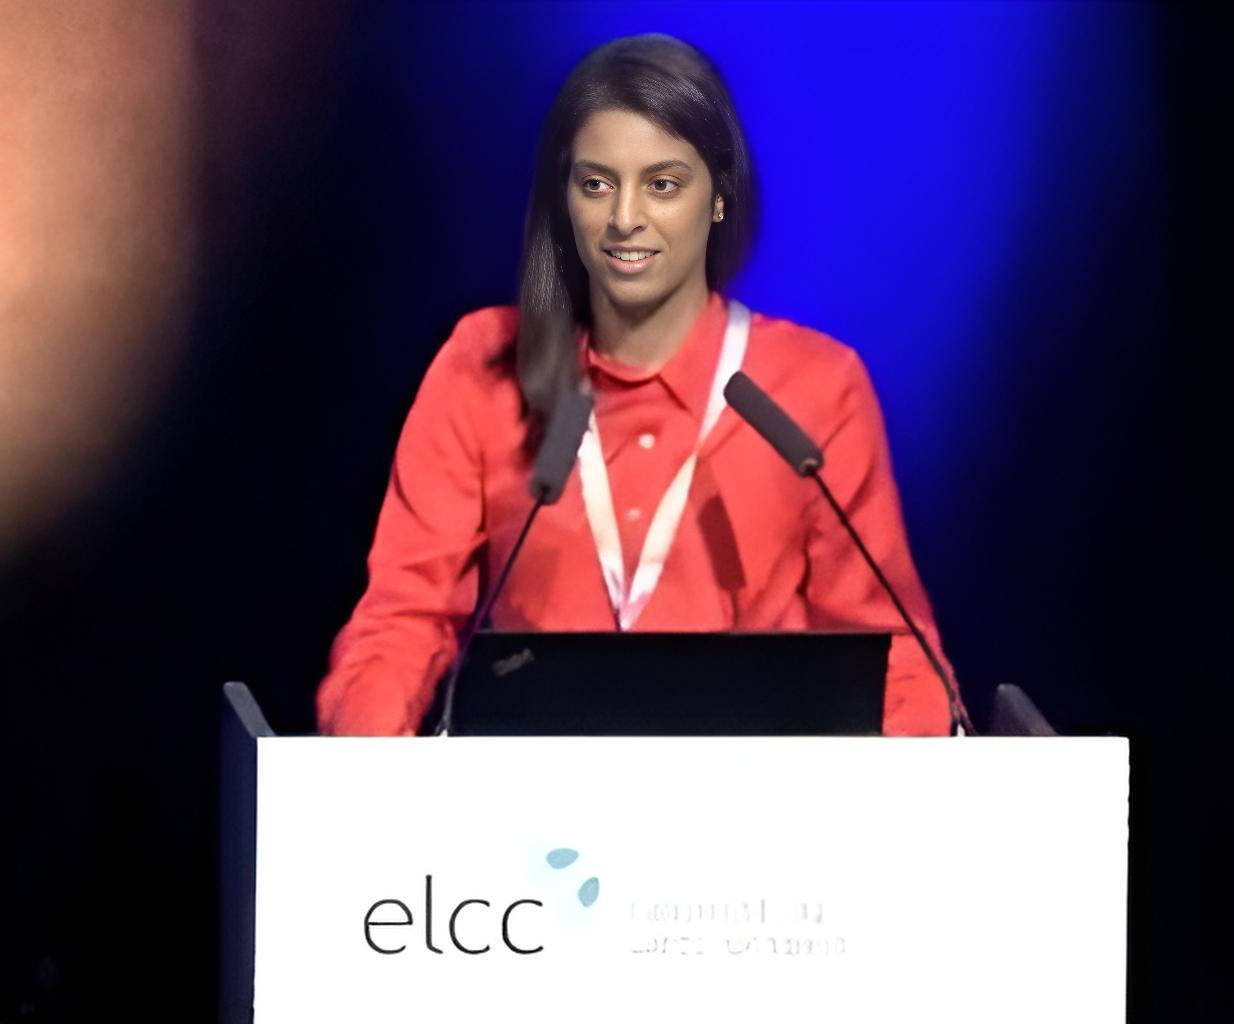 Stephen V Liu: ELCC24 Great discussion of Antibody drug conjugates toxicity from Dr. Jarushka Naidoo, noting that each component of the antibody drug conjugate will impact toxicity